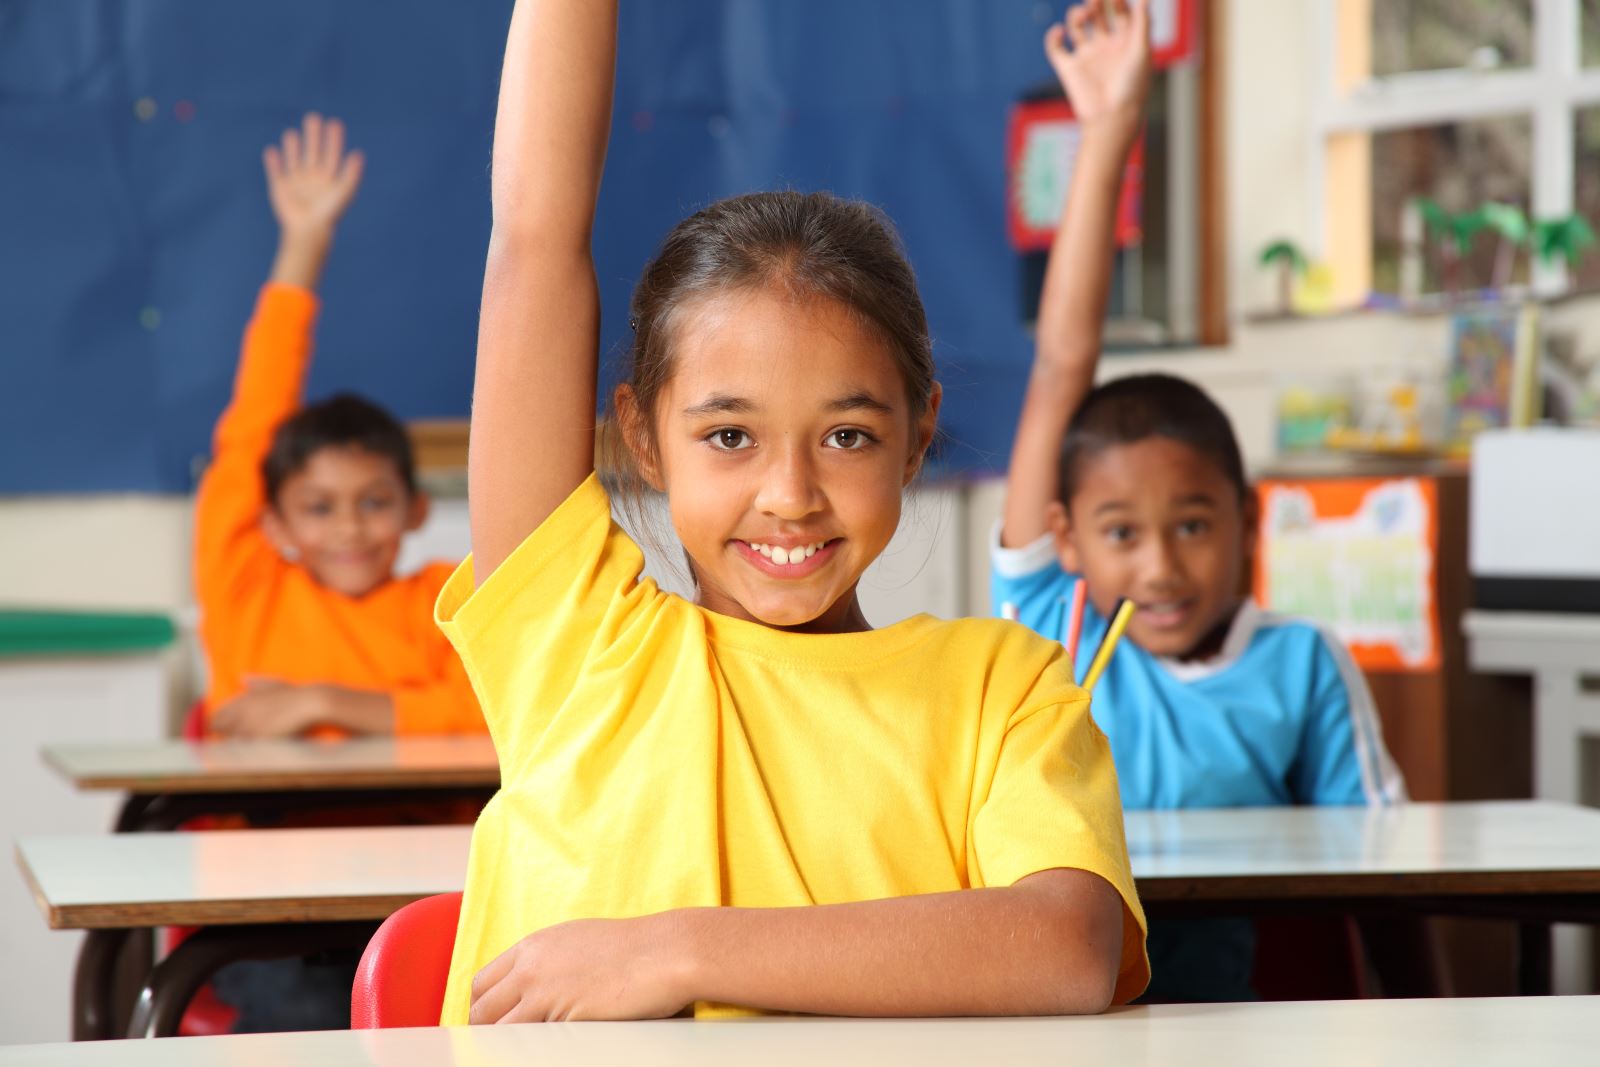 3 non-white smiling preteens in orange, yellow, and blue shirts raise their hands in a classroom